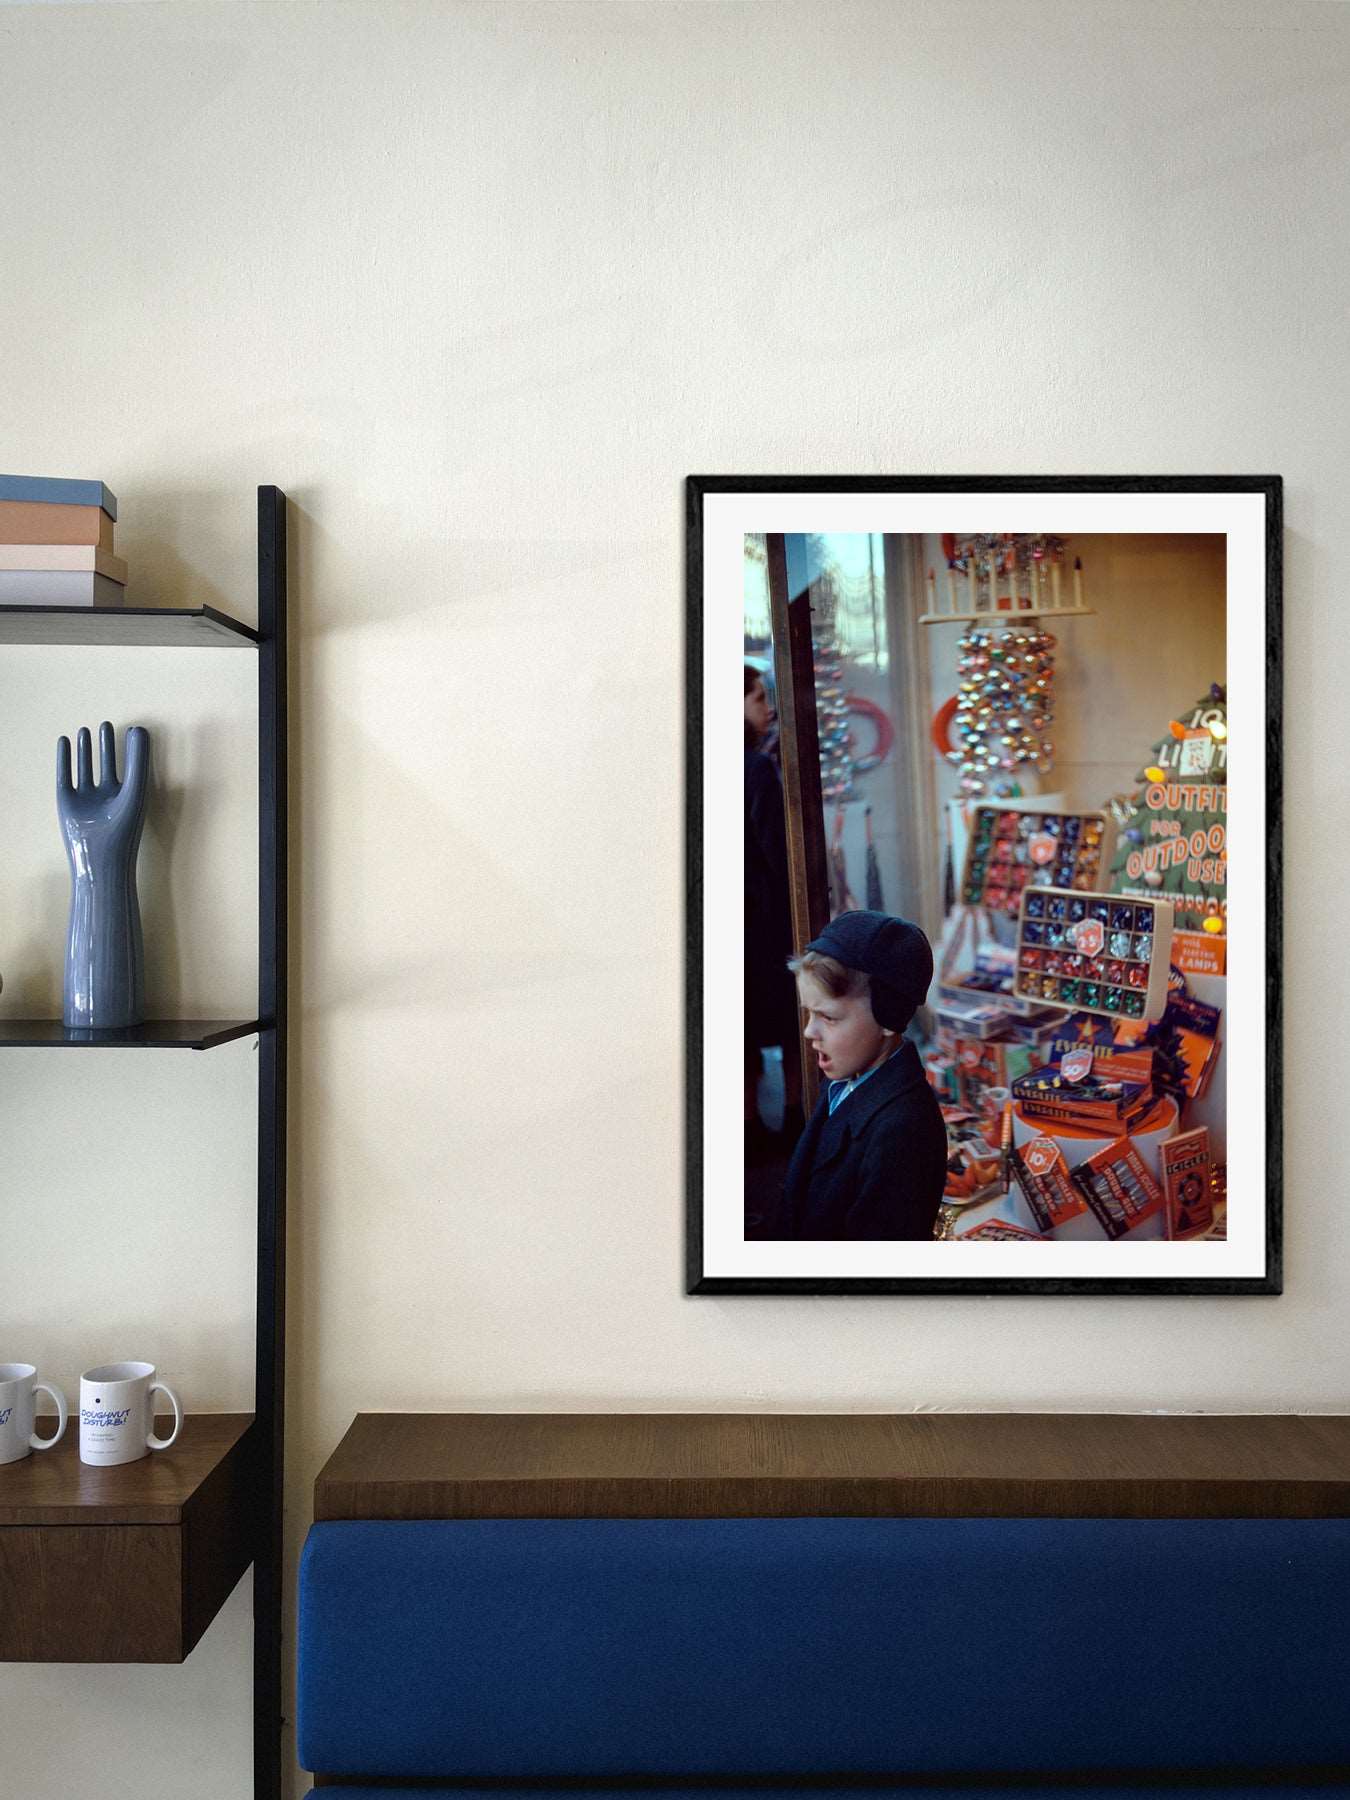 A framed paper print of a vintage photograph of a Christmas display hangs in a modern room